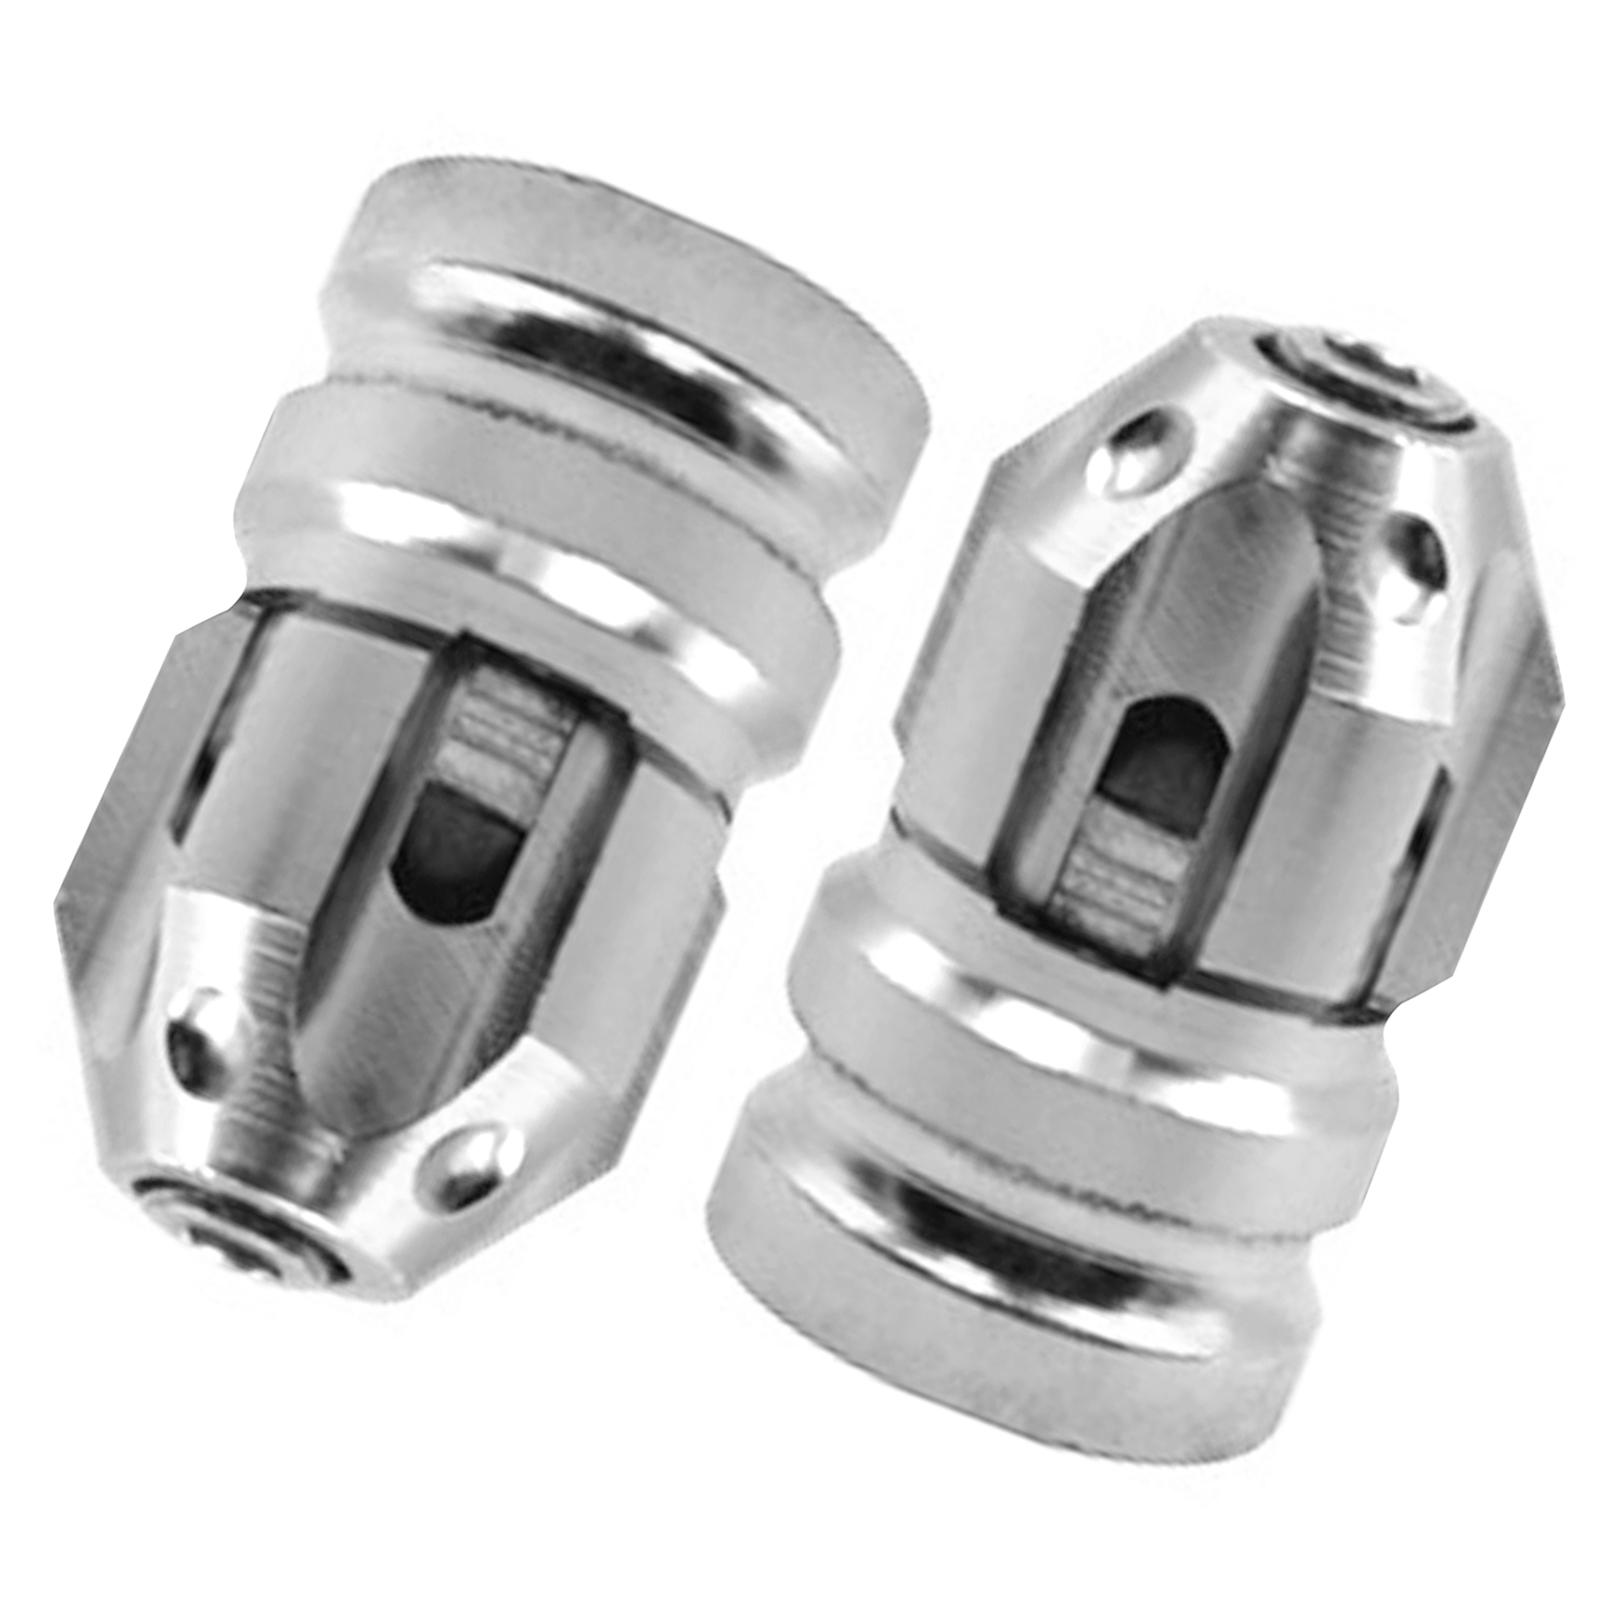 2Pcs Tire Valve Stem Caps Protection Fit for Motorcycles Suvs Mountain Bike Silver